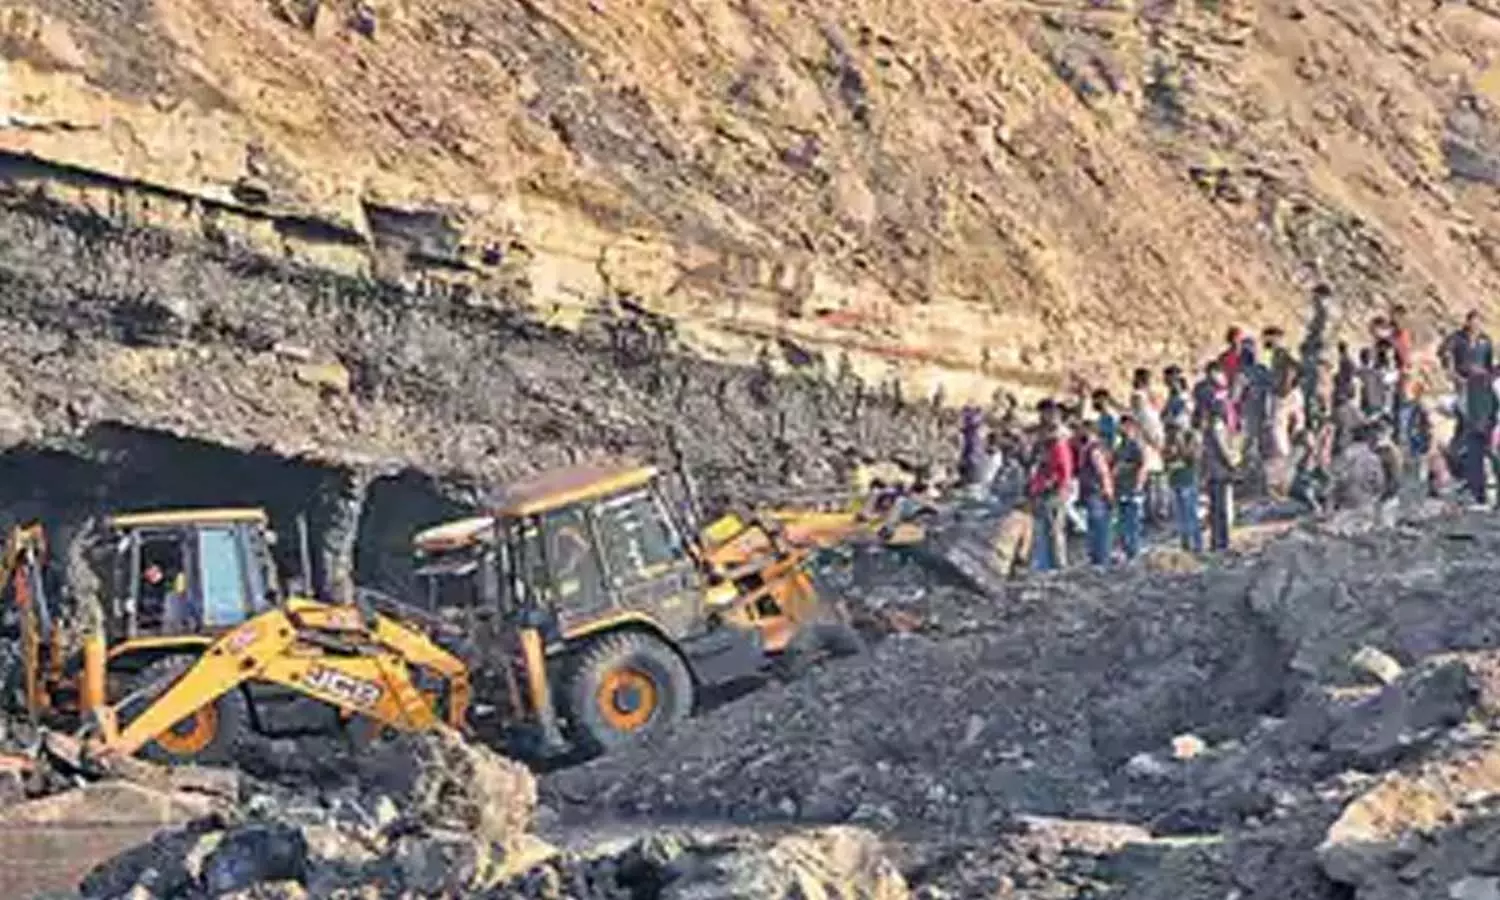 Dozens of people buried due to ground collapse during illegal coal mining in Dhanbad